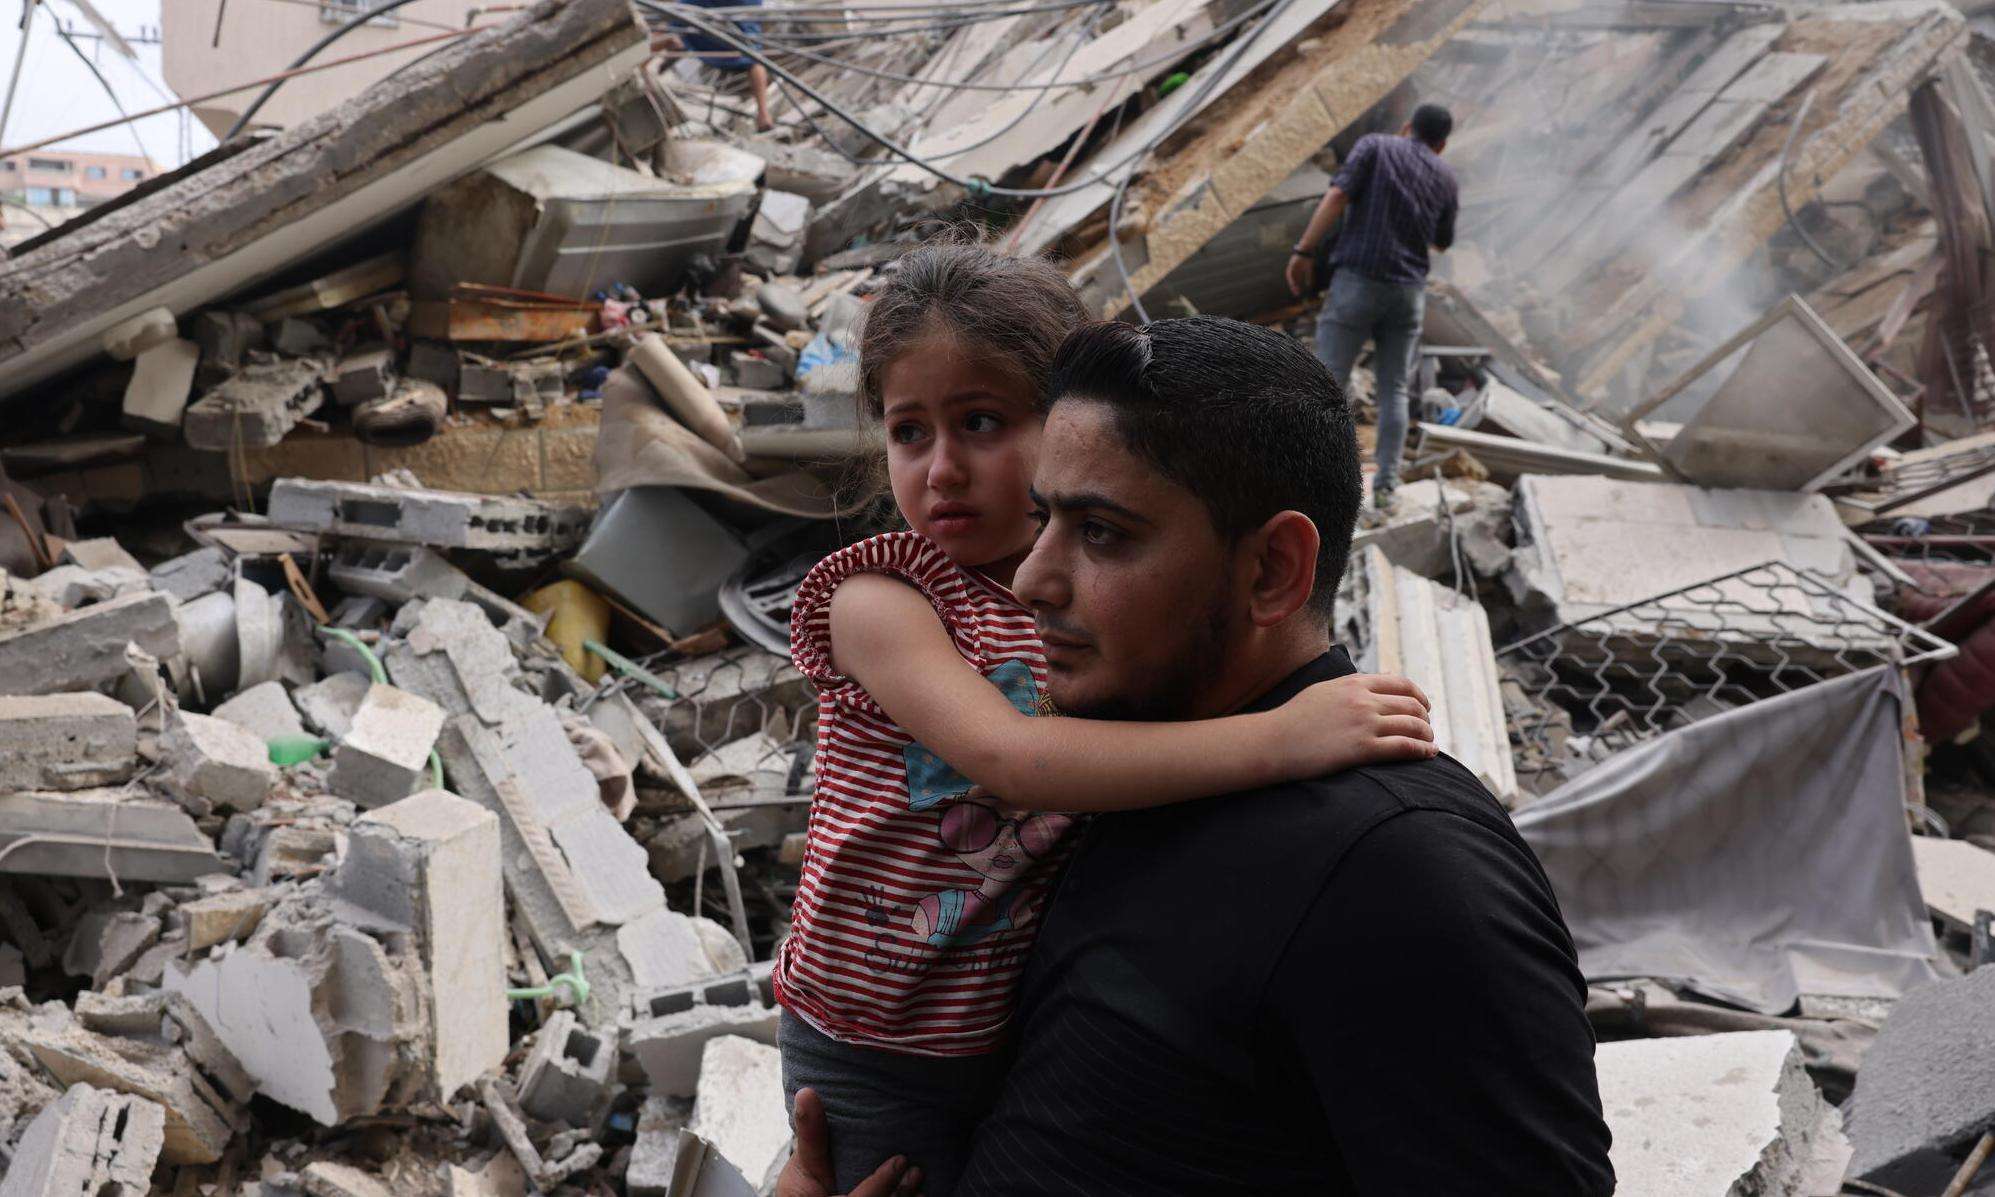 A man holding a child with wreckage from Israeli bombardment in Gaza behind them.